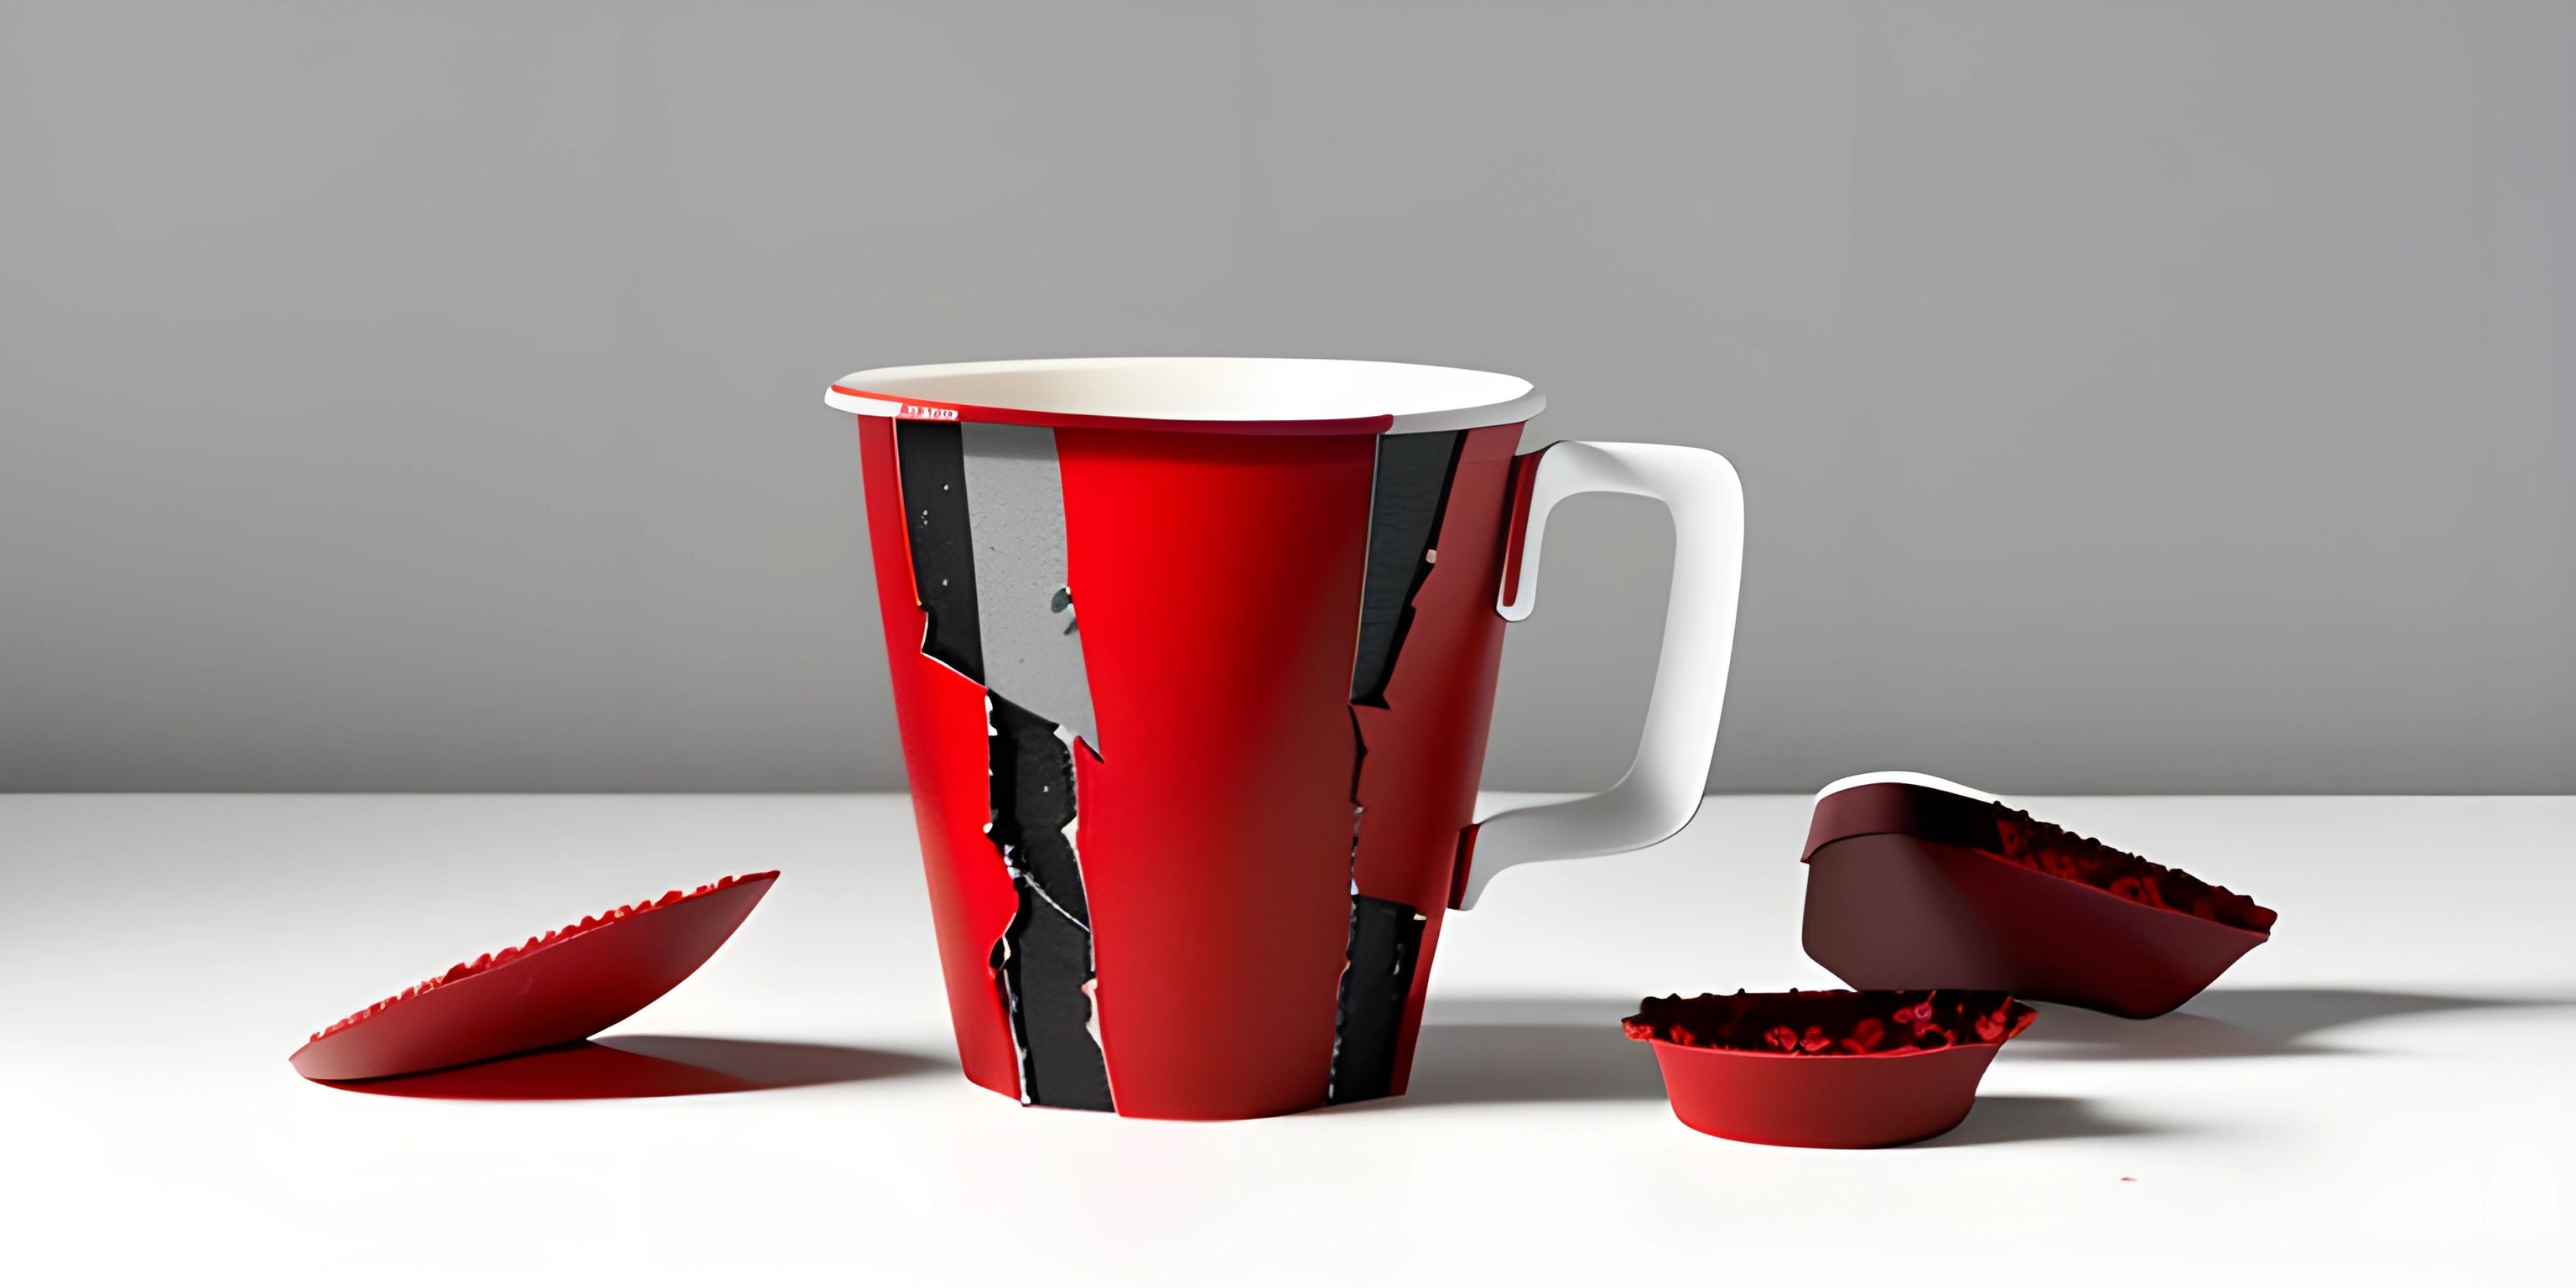 red and white coffee cup with a broken handle sitting next to red candy cups on the table